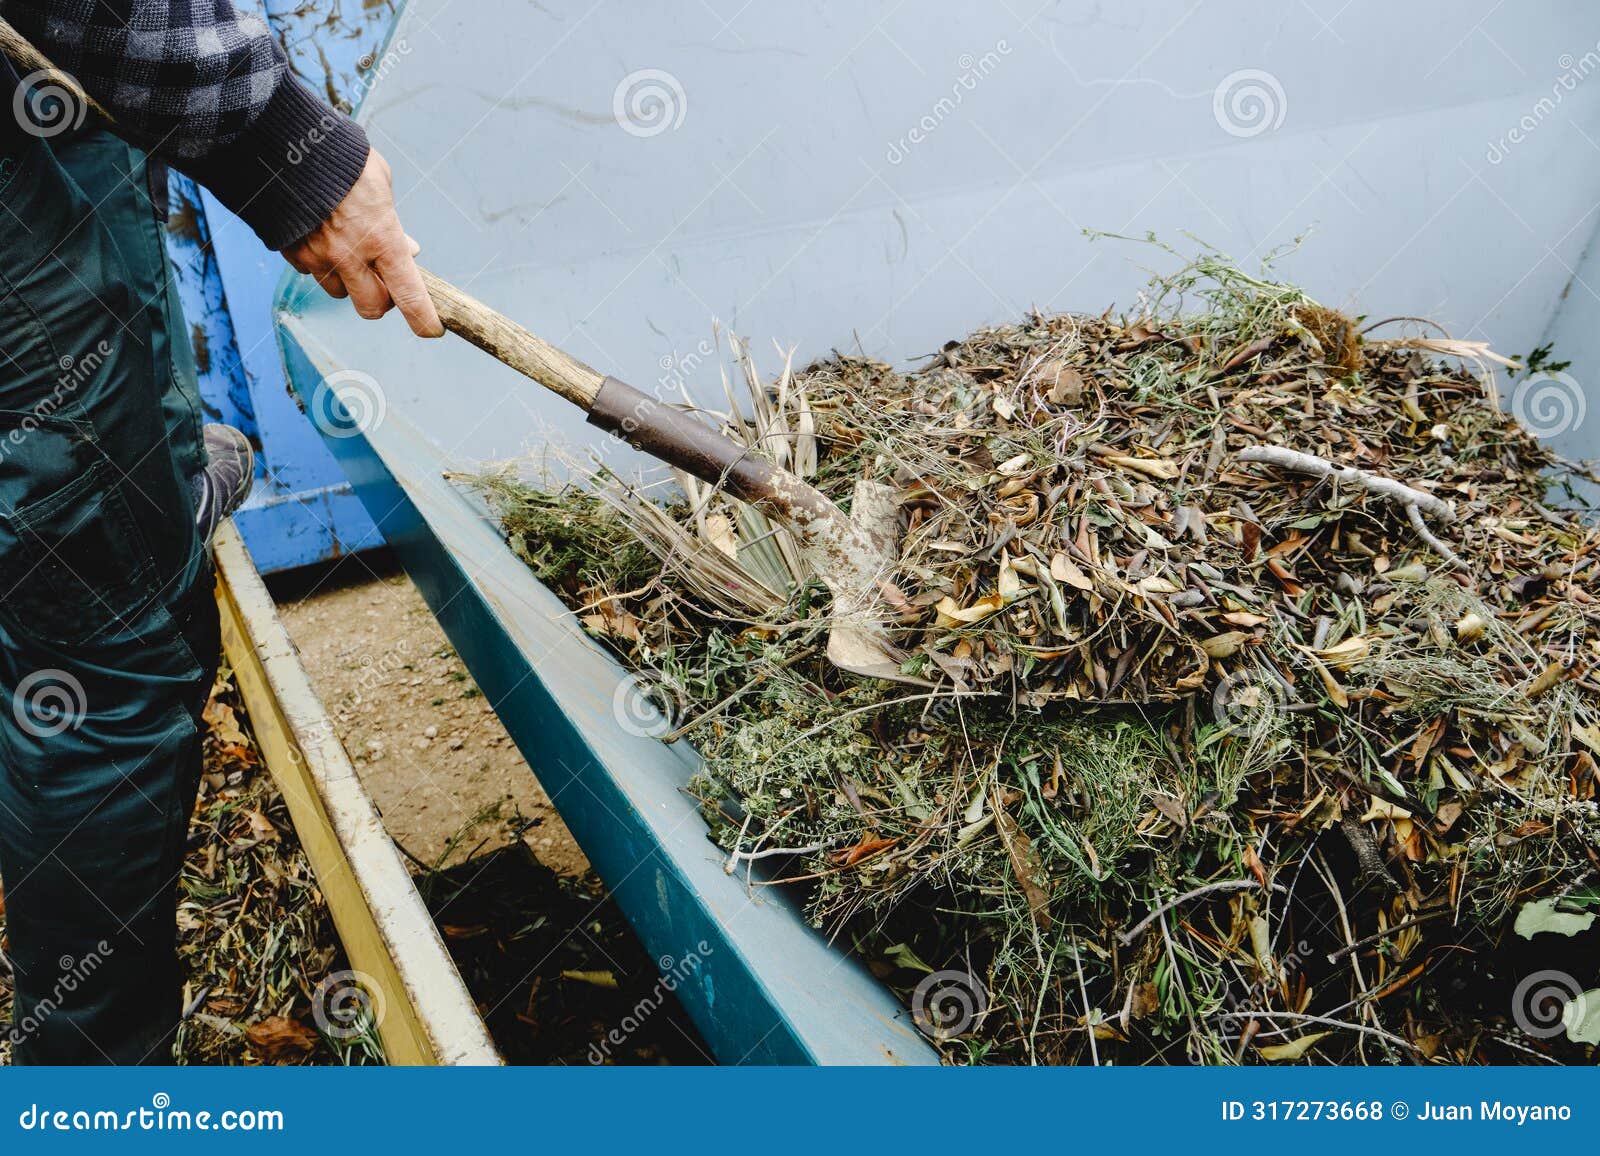 man throwing plant remains into a large container